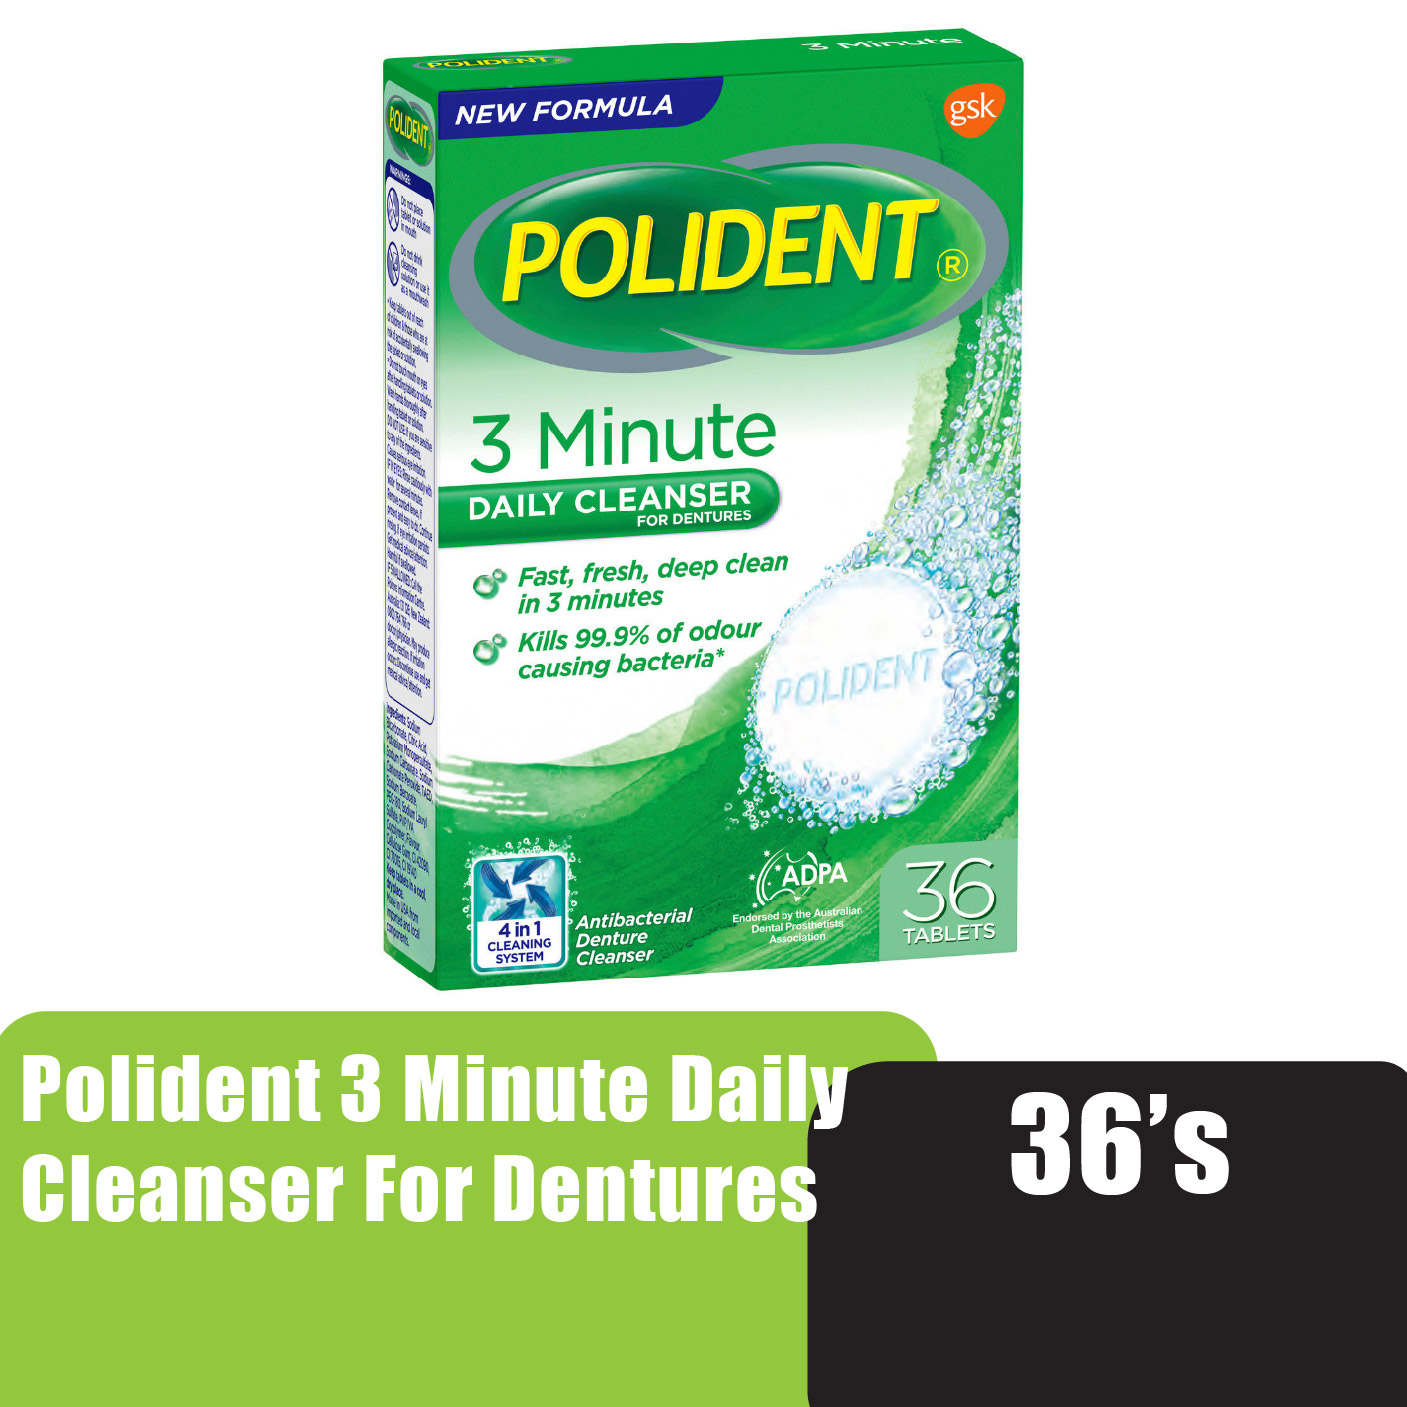 POLIDENT Cleanser For Denture (3 Minute Antibacterial) 36 Tablets - Polident Retainer Cleanser 假牙清洁片